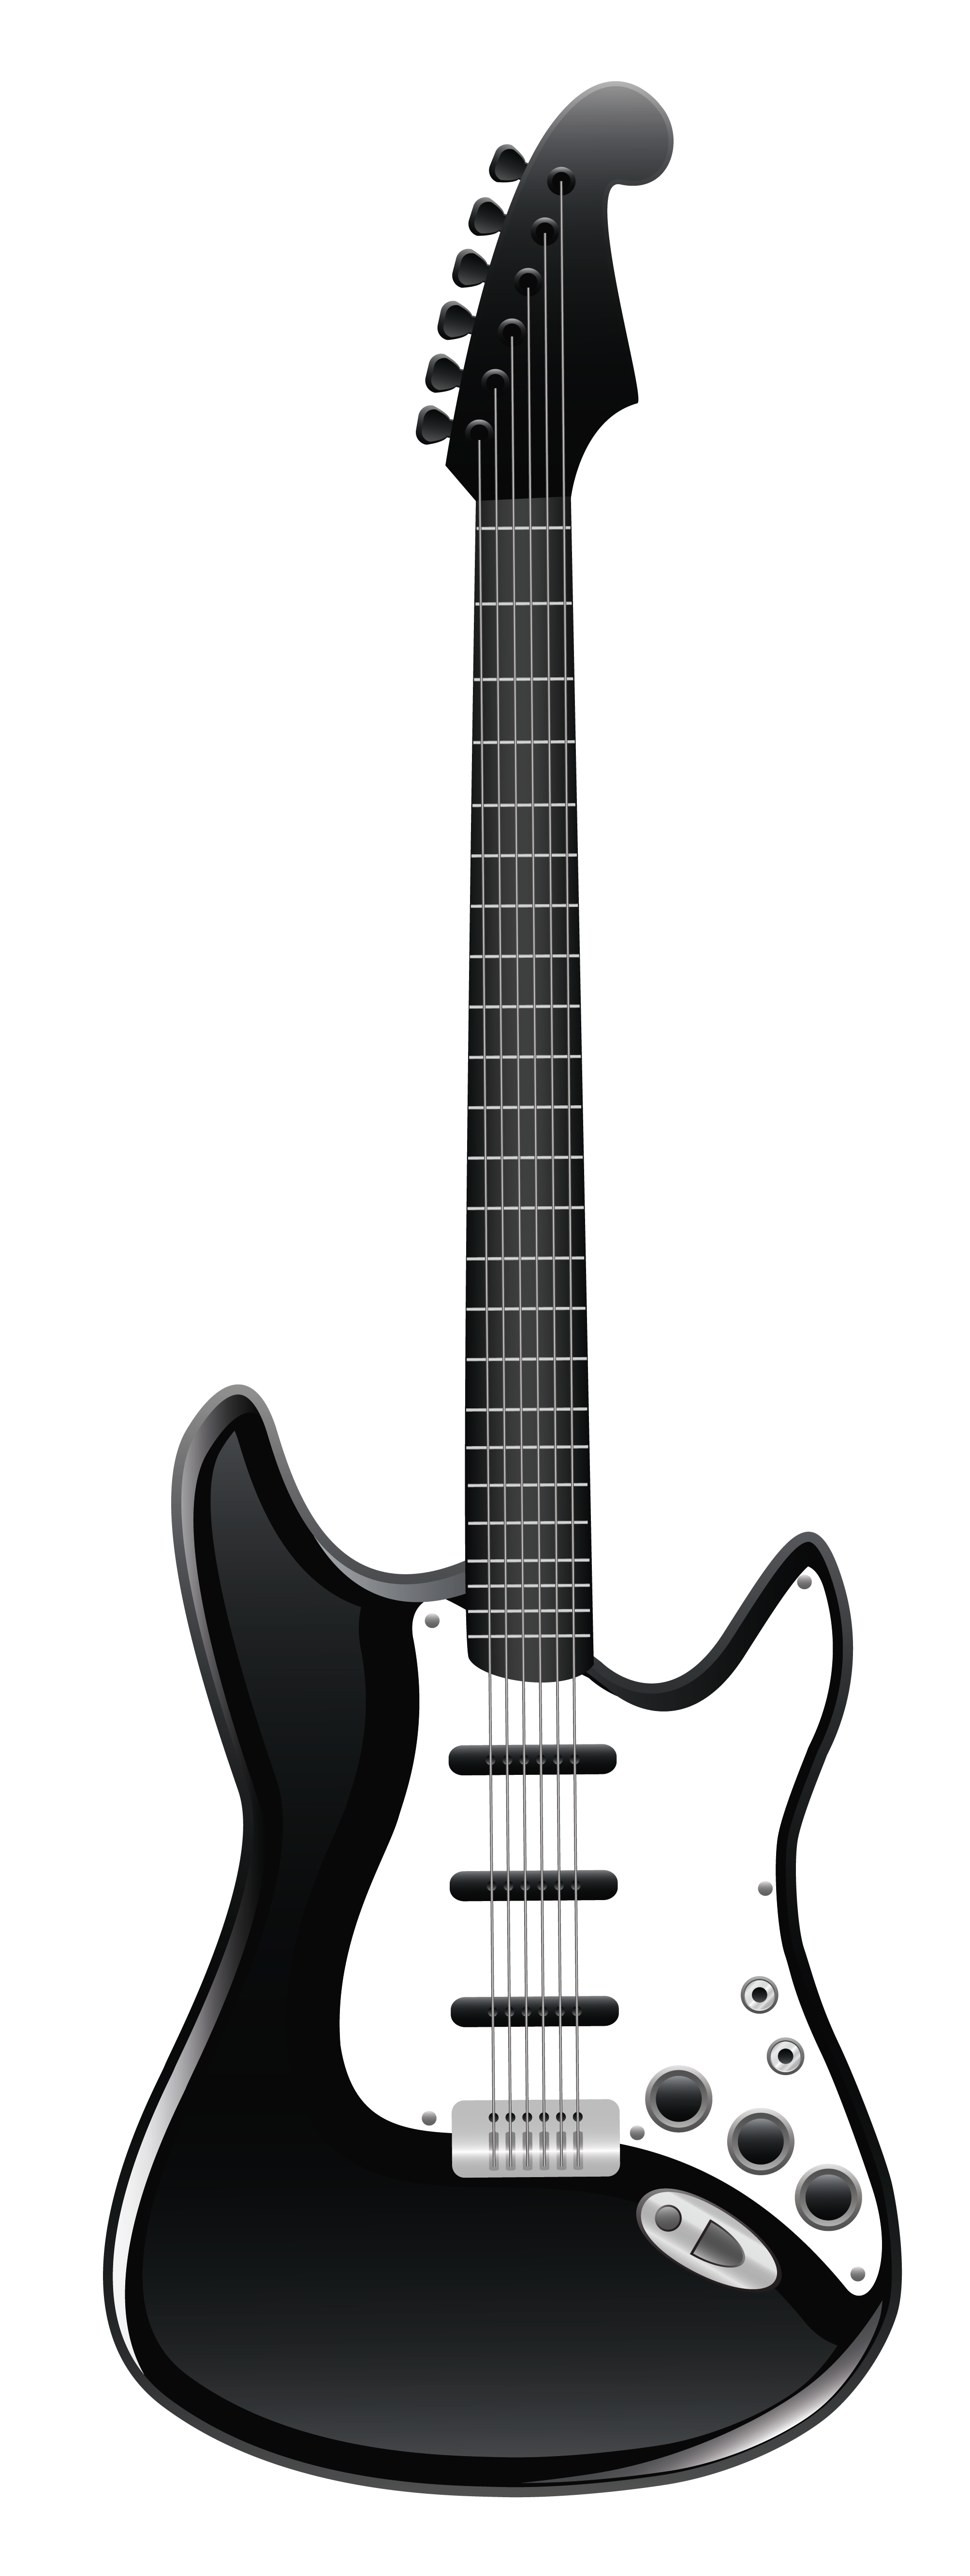 Guitar Clipart Black And White - Gallery